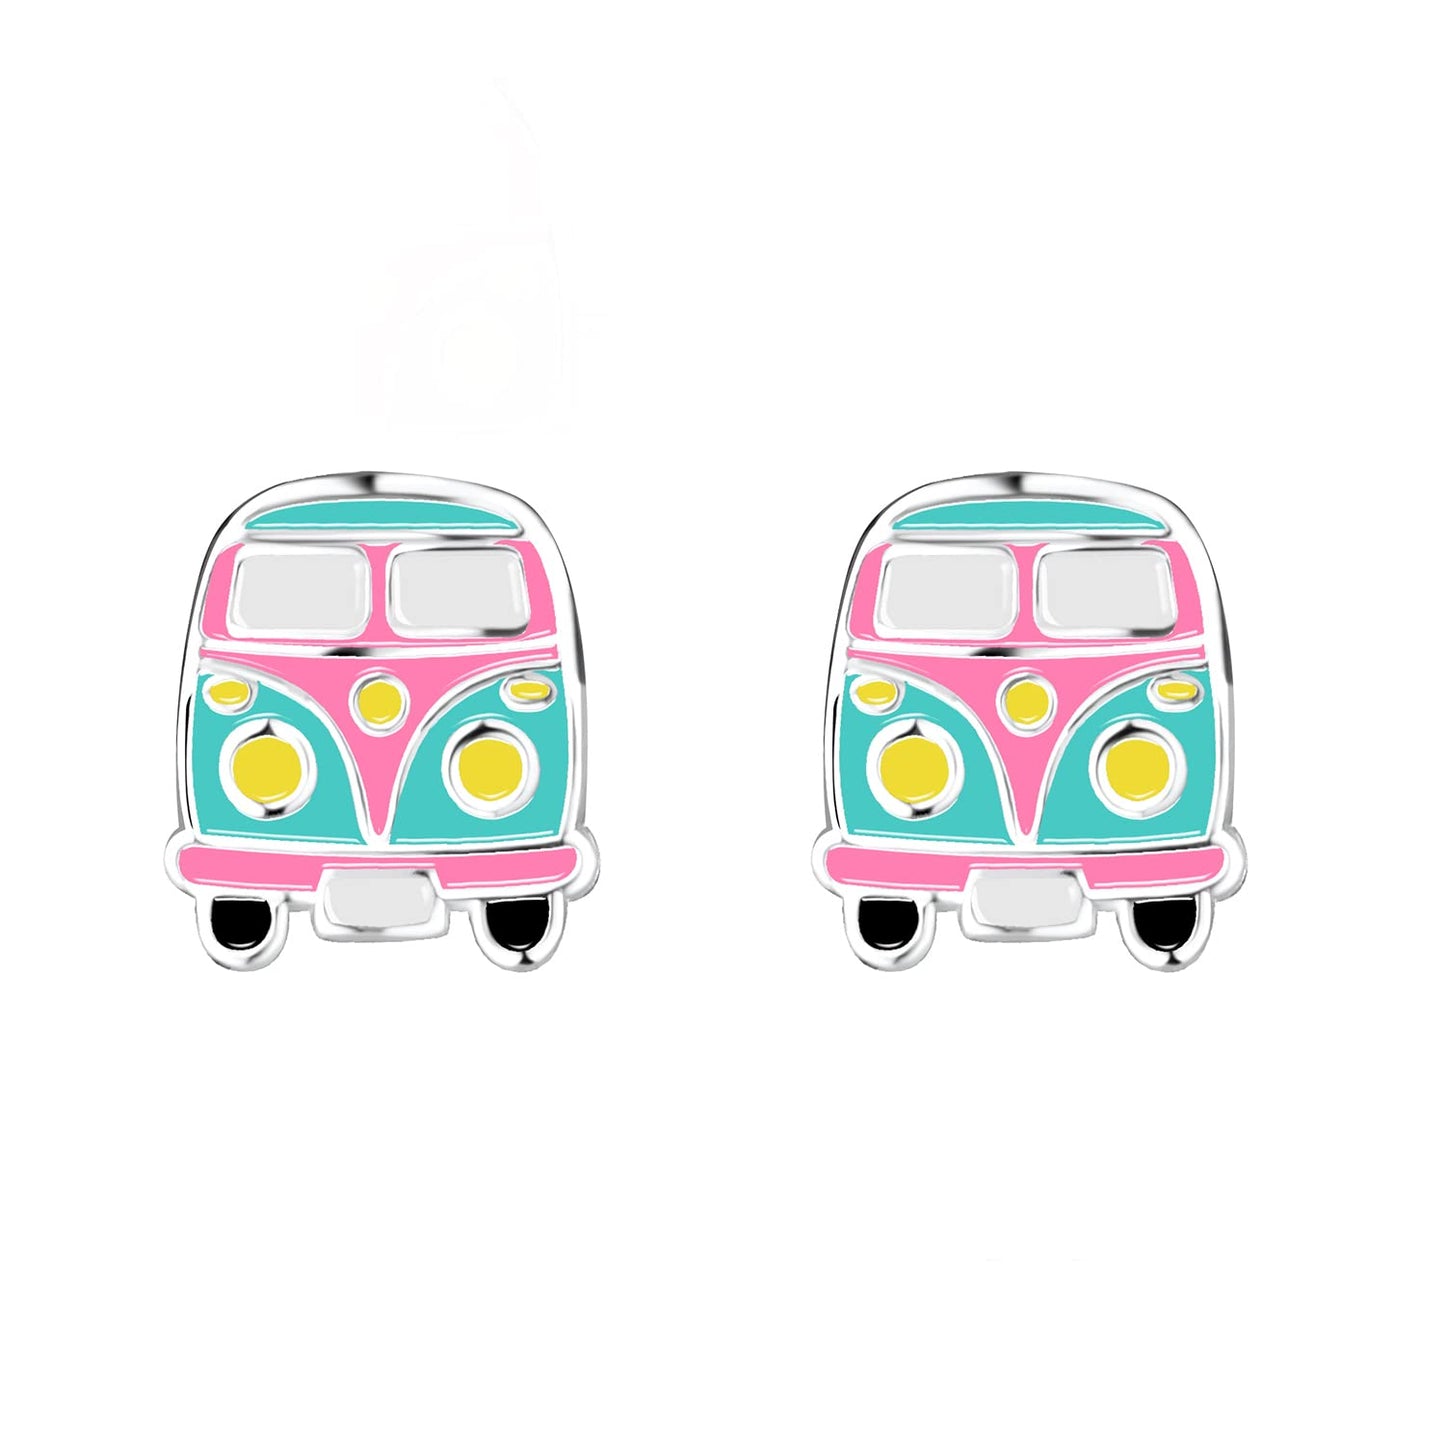 Raajsi by Yellow Chimes 925 Sterling Silver Stud Earring for Girls  Kids Melbees Kids Collection Bus Designed Birthday Gift for Girls Kids  With Certificate of Authenticity  6 Month Warranty